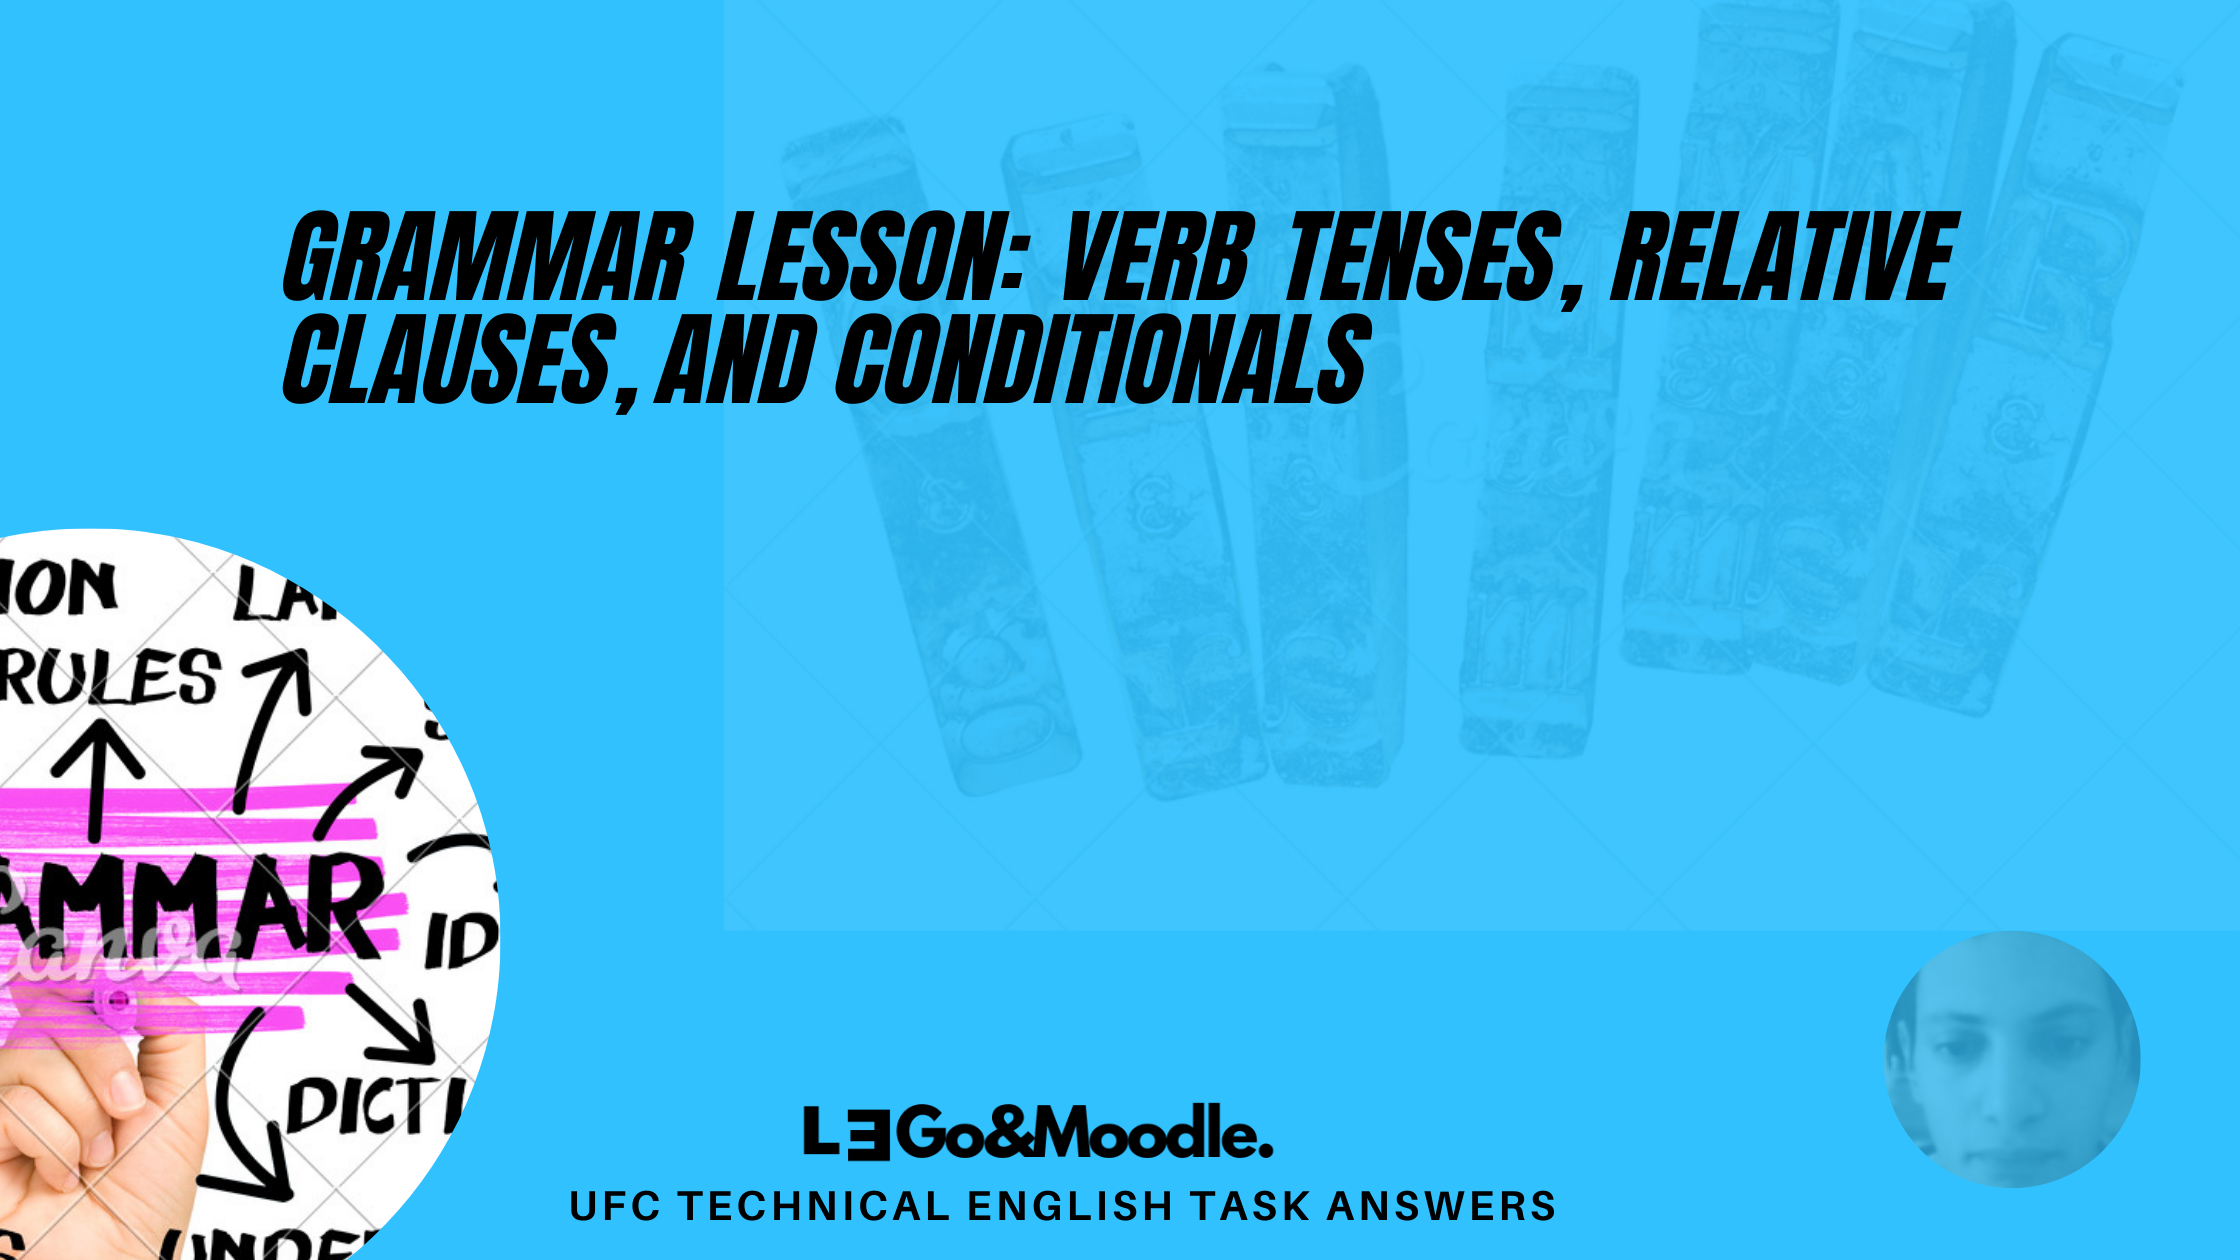 Grammar lesson: Verb Tenses, Relative Clauses, and Conditionals